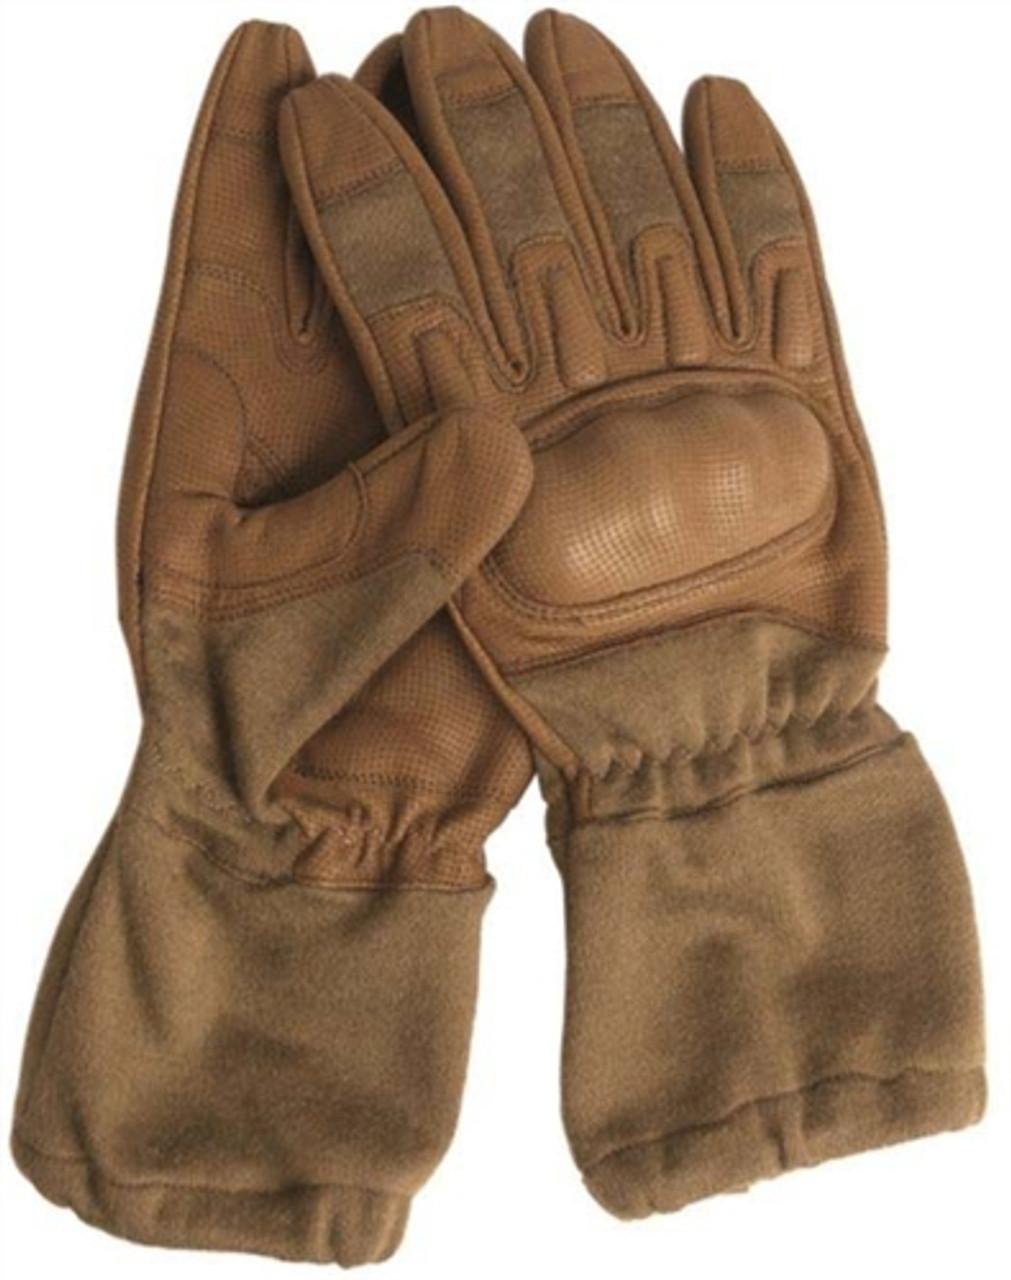 Mil-Tec Coyote Flame Resistant Action Gloves - New from Hessen Antique